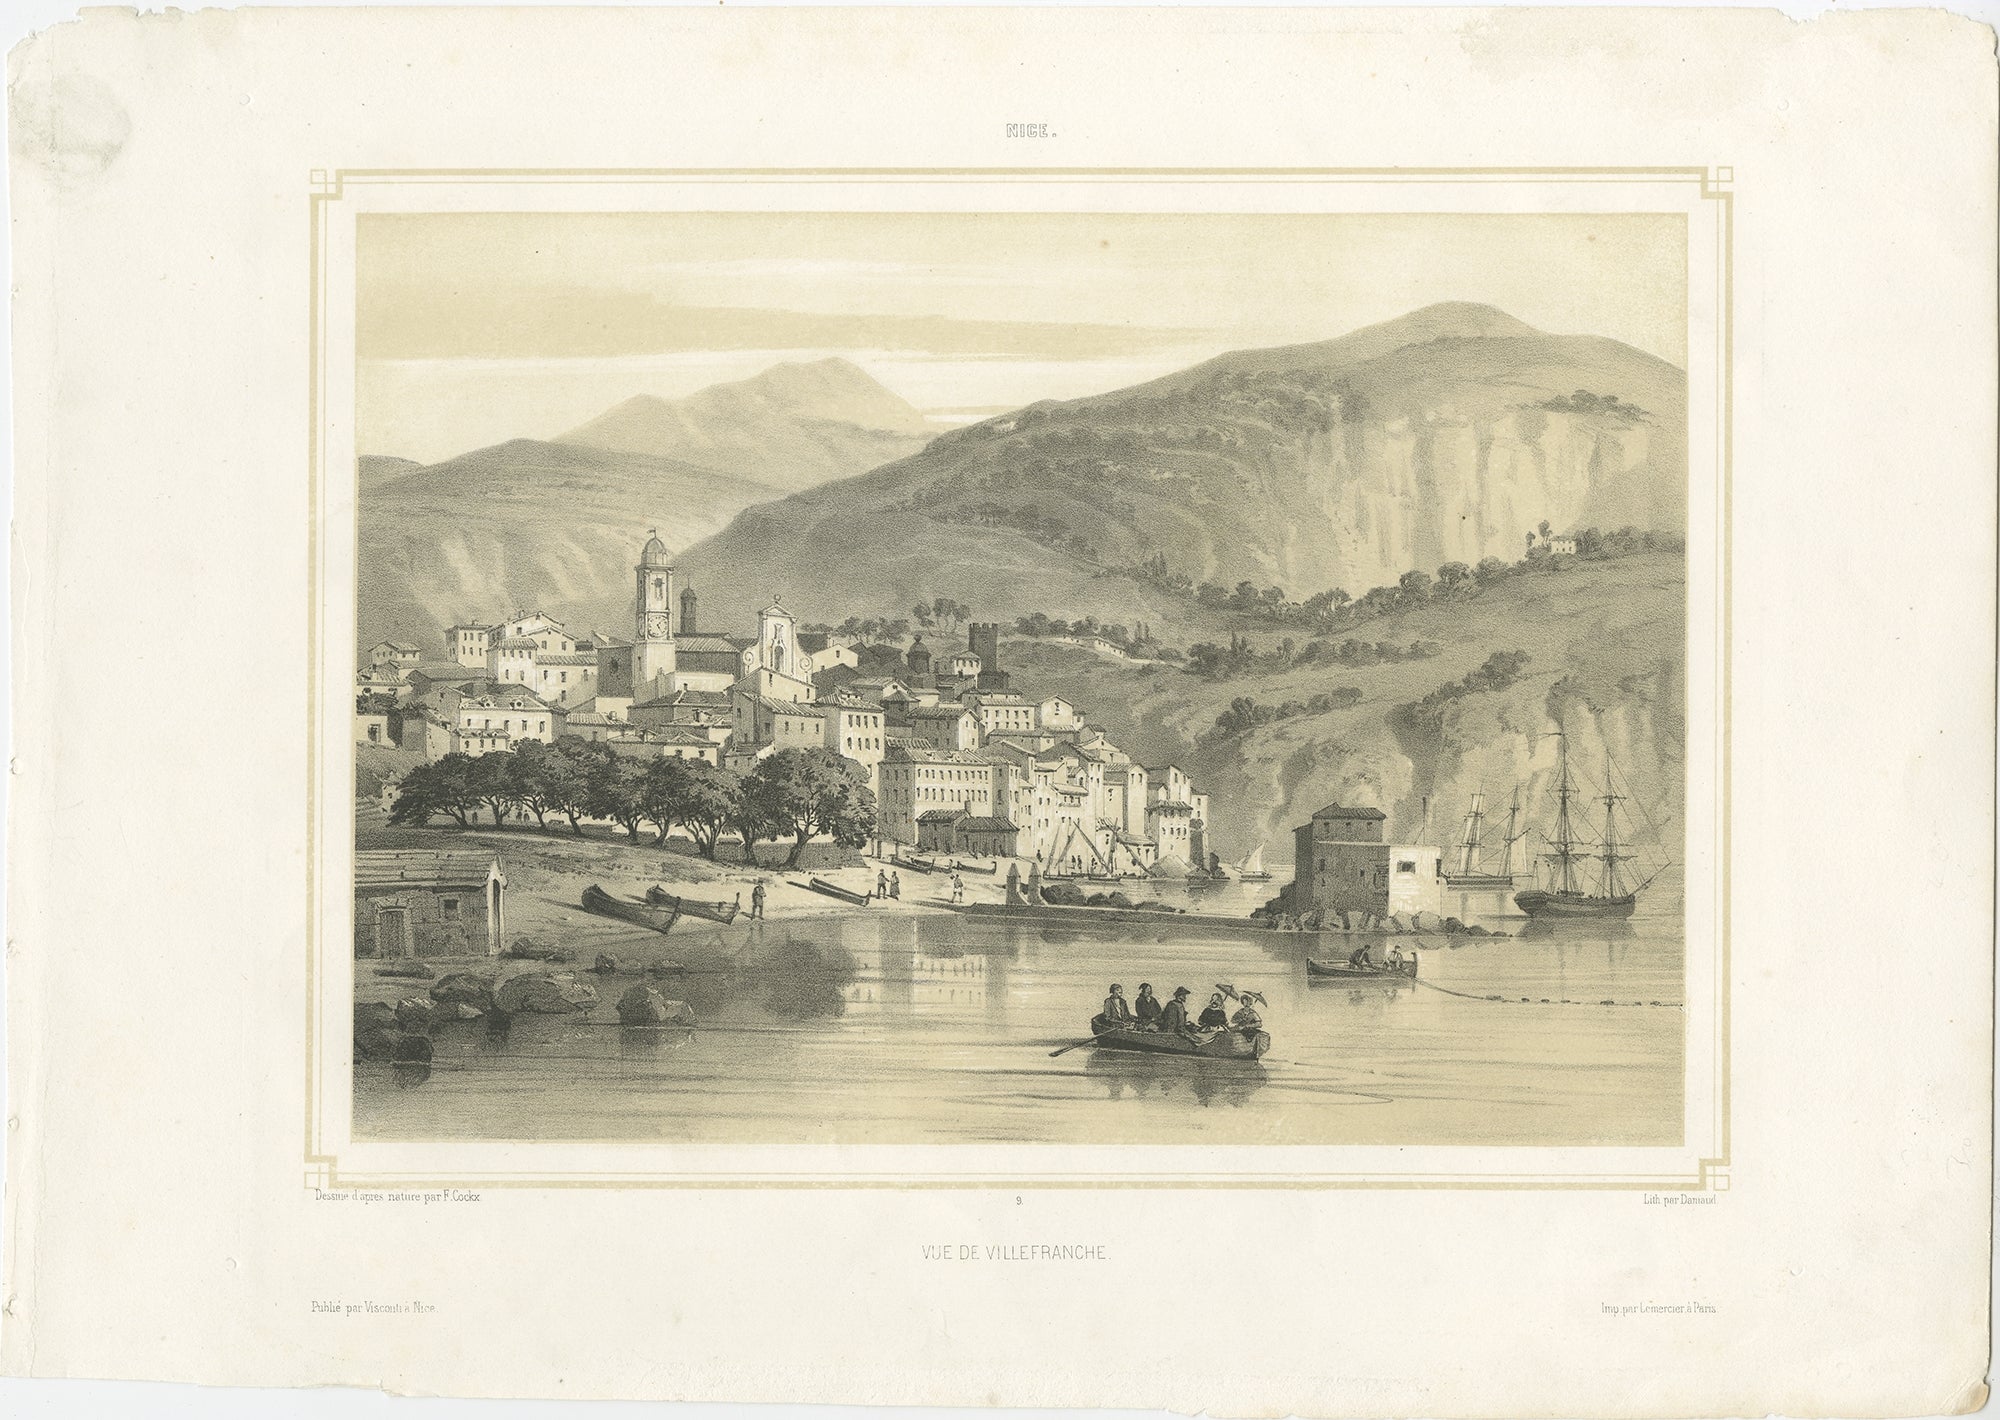 Antique print titled 'Vue de Villefranche'. View of Villefranche near Nice, France. This print originates from 'Nice et ses environs', published 1855. This print originates from the series 'Nice et ses environs', published 1855.

Artists and